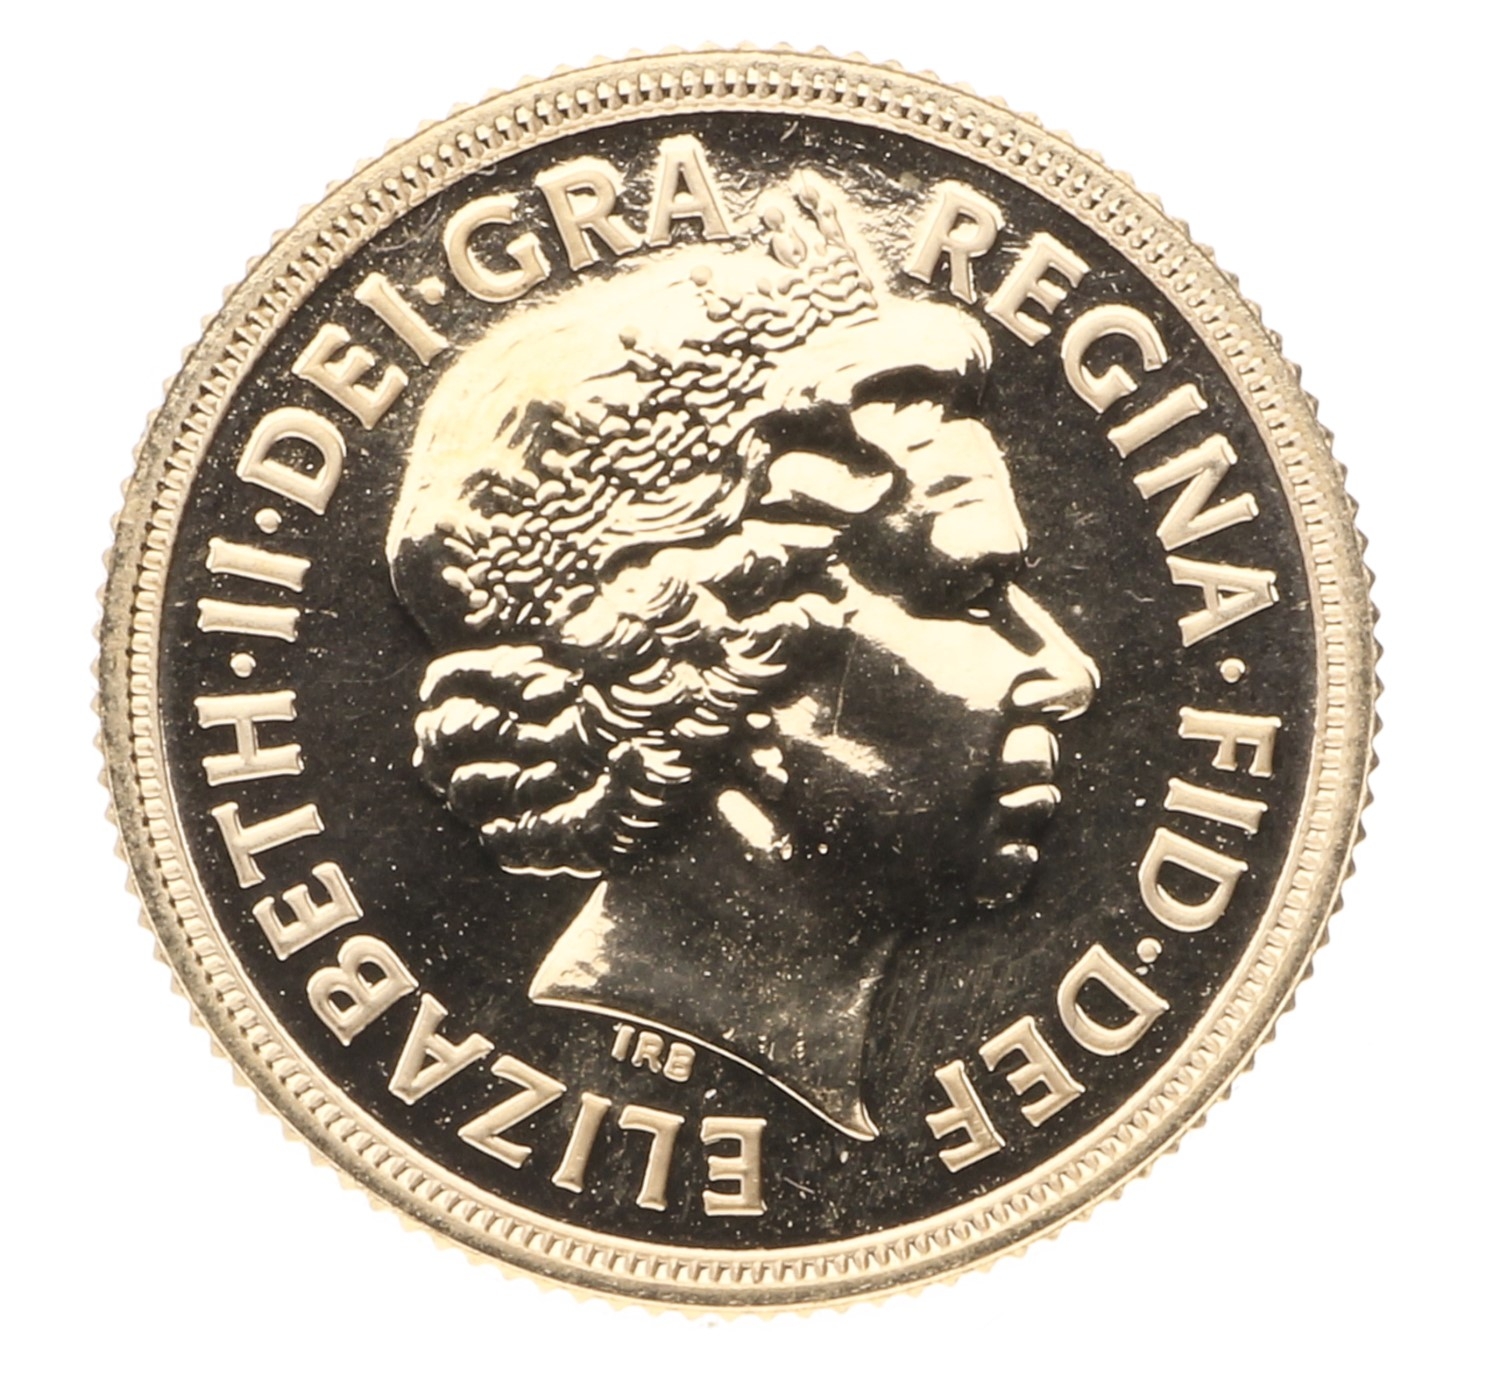 1 Sovereign  - Great Britain - 2015